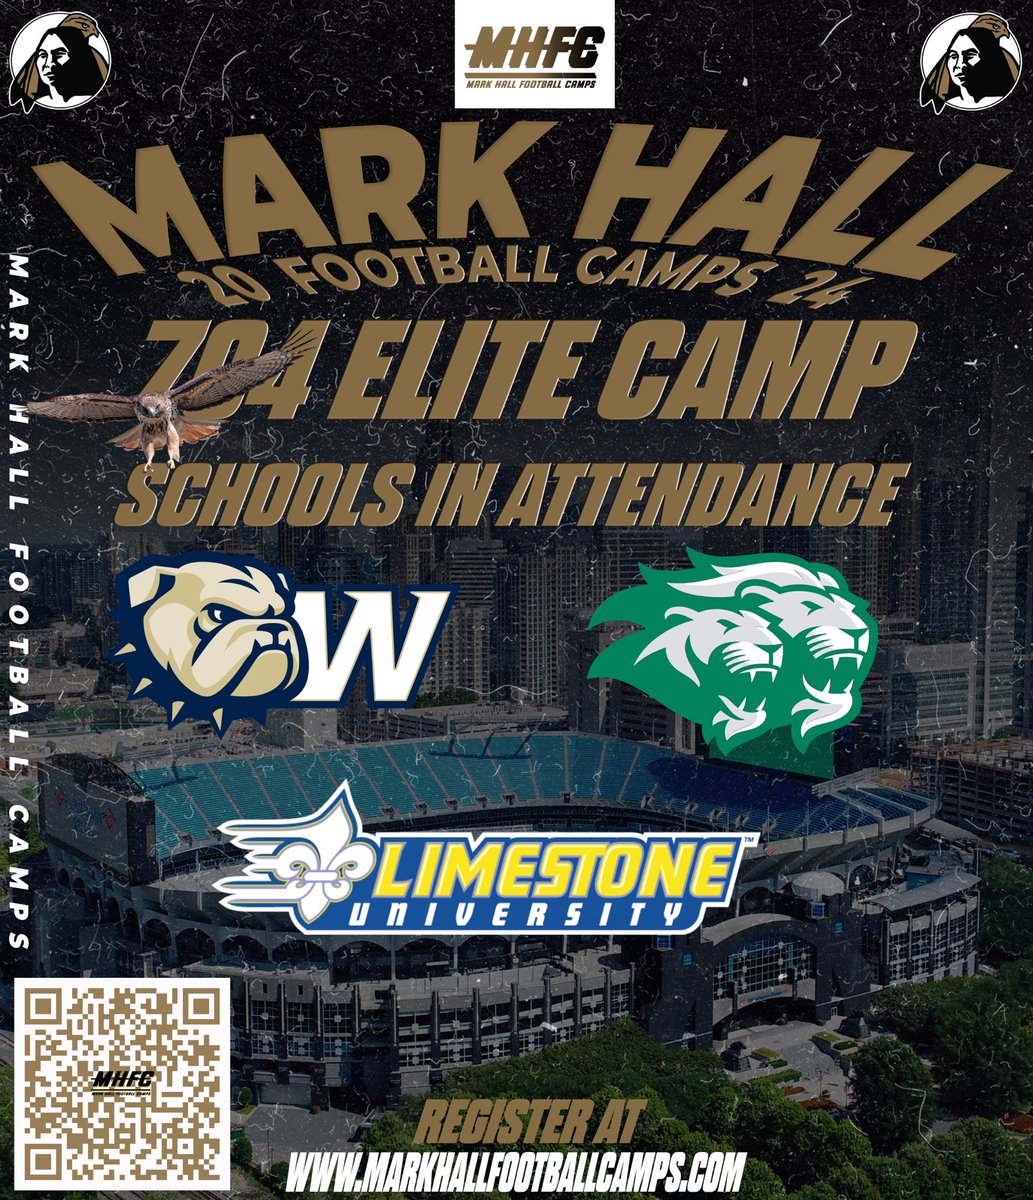 7️⃣0️⃣4️⃣ Tomorrow we will be in the city! Friday Night Lights Satellite camp is the place to be! Still time to register! Hope to see you there! Another Opportunity to earn that 🅾️! markhallfootballcamps.com/event-details-…